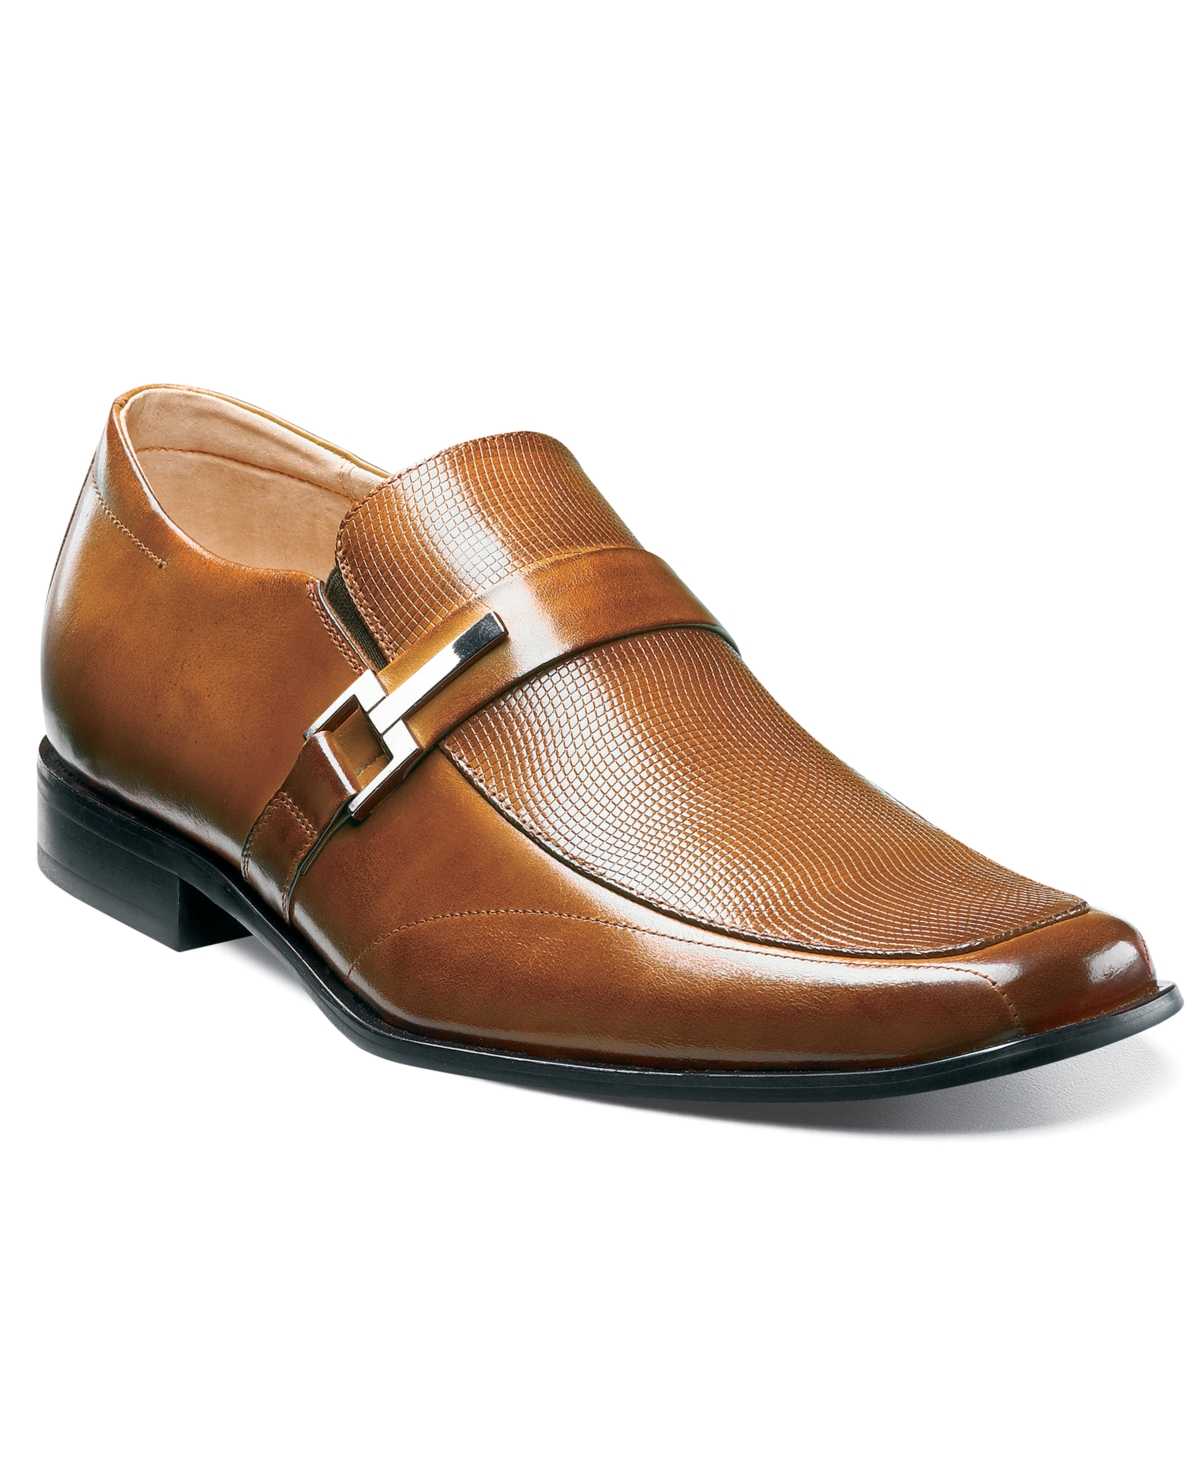 Men's Beau Bit Perforated Leather Loafer - Cognac